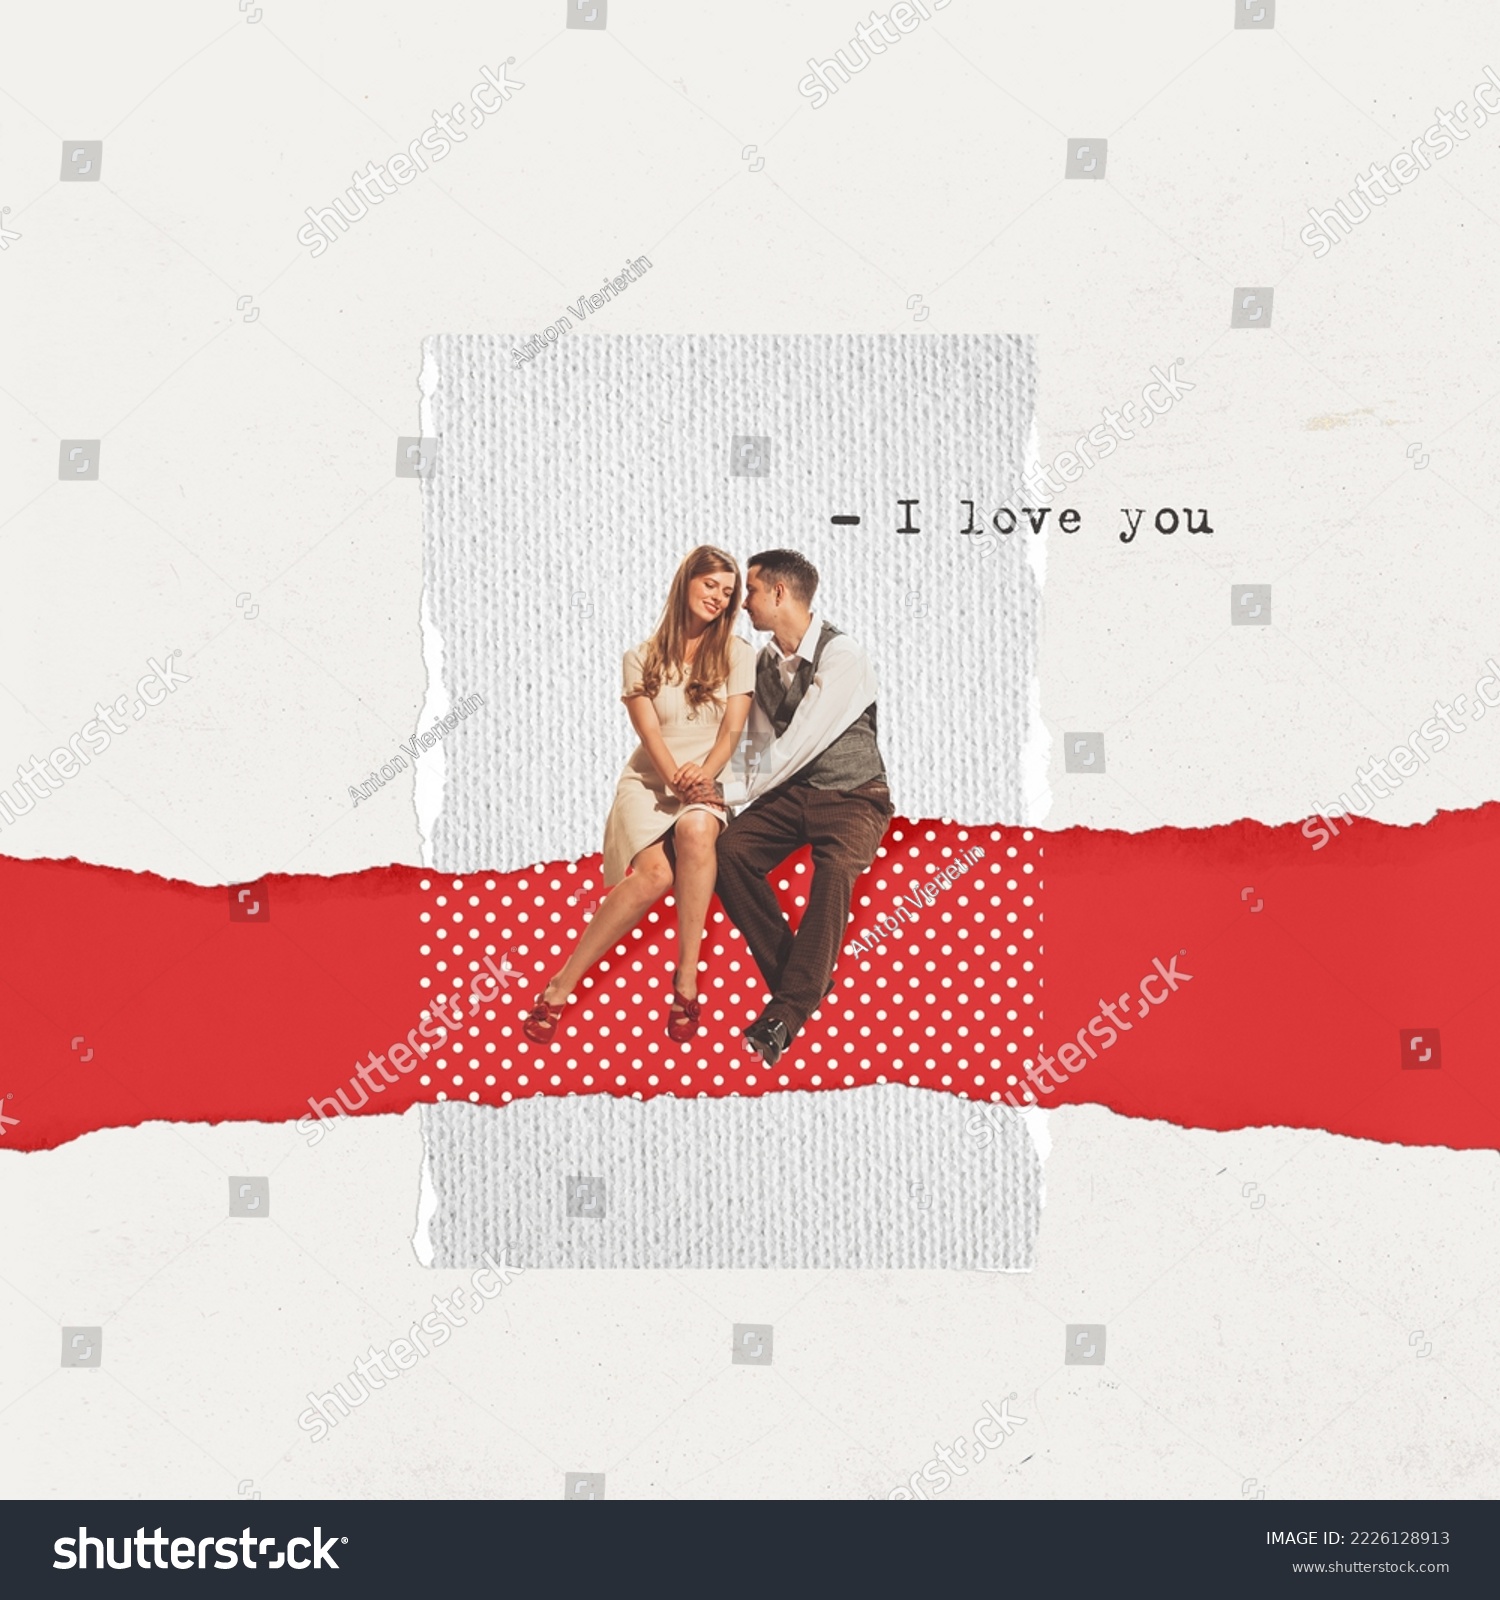 Contemporary art collage. Creative design in retro style. Lovely couple sitting together, man saying I love you. Concept of relationship, Valentine's Day, love, feelings, emotions. Copy space for ad #2226128913